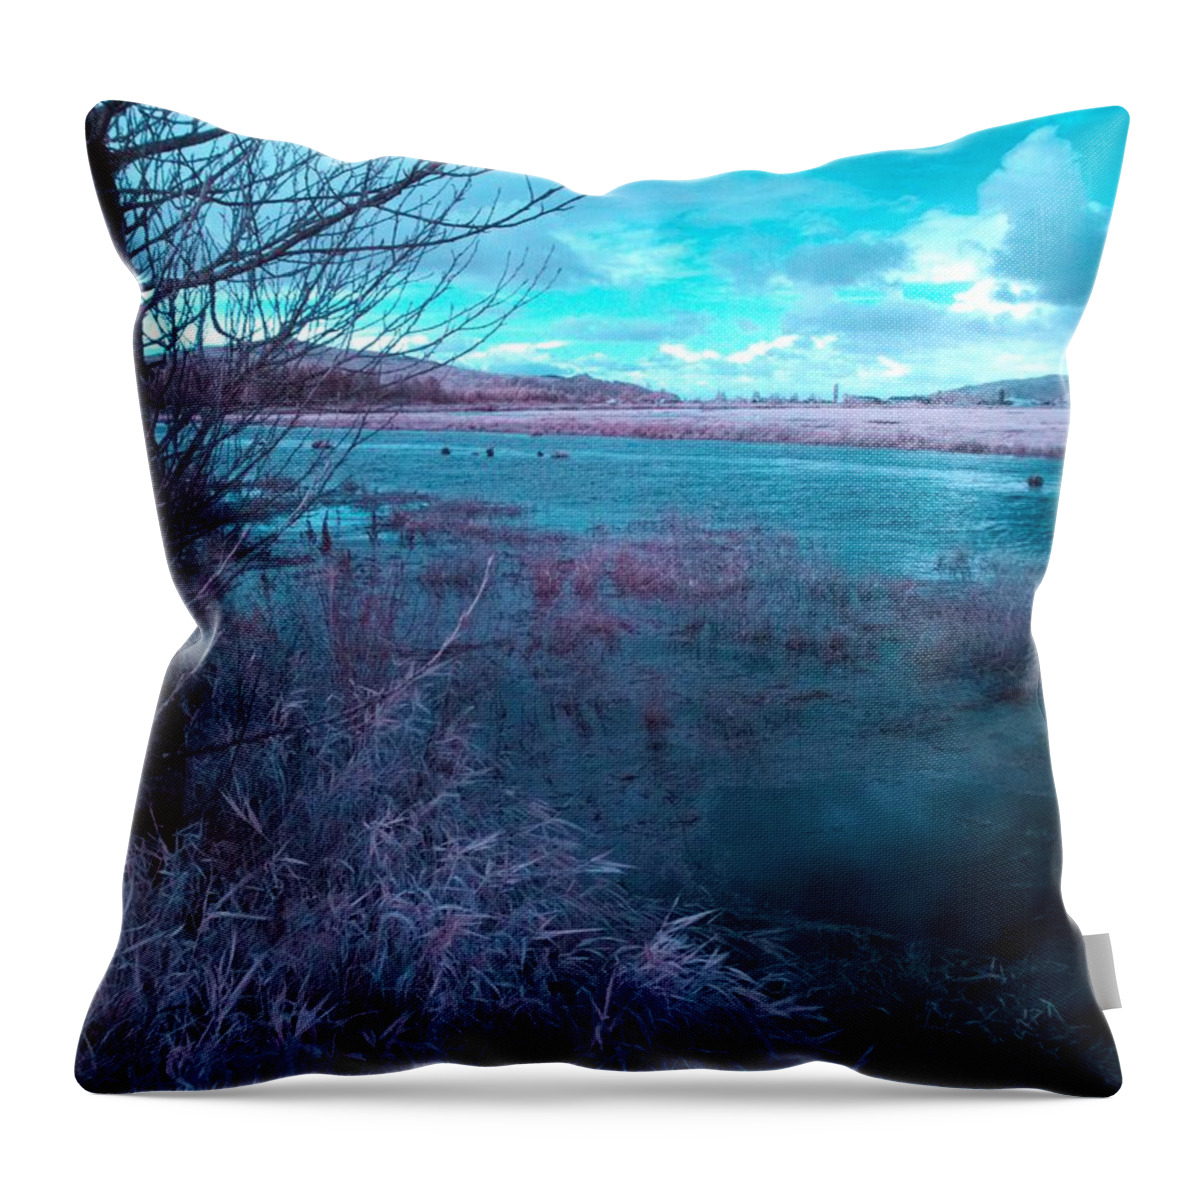 Surreal Throw Pillow featuring the photograph After Storm Surrealism by Chriss Pagani